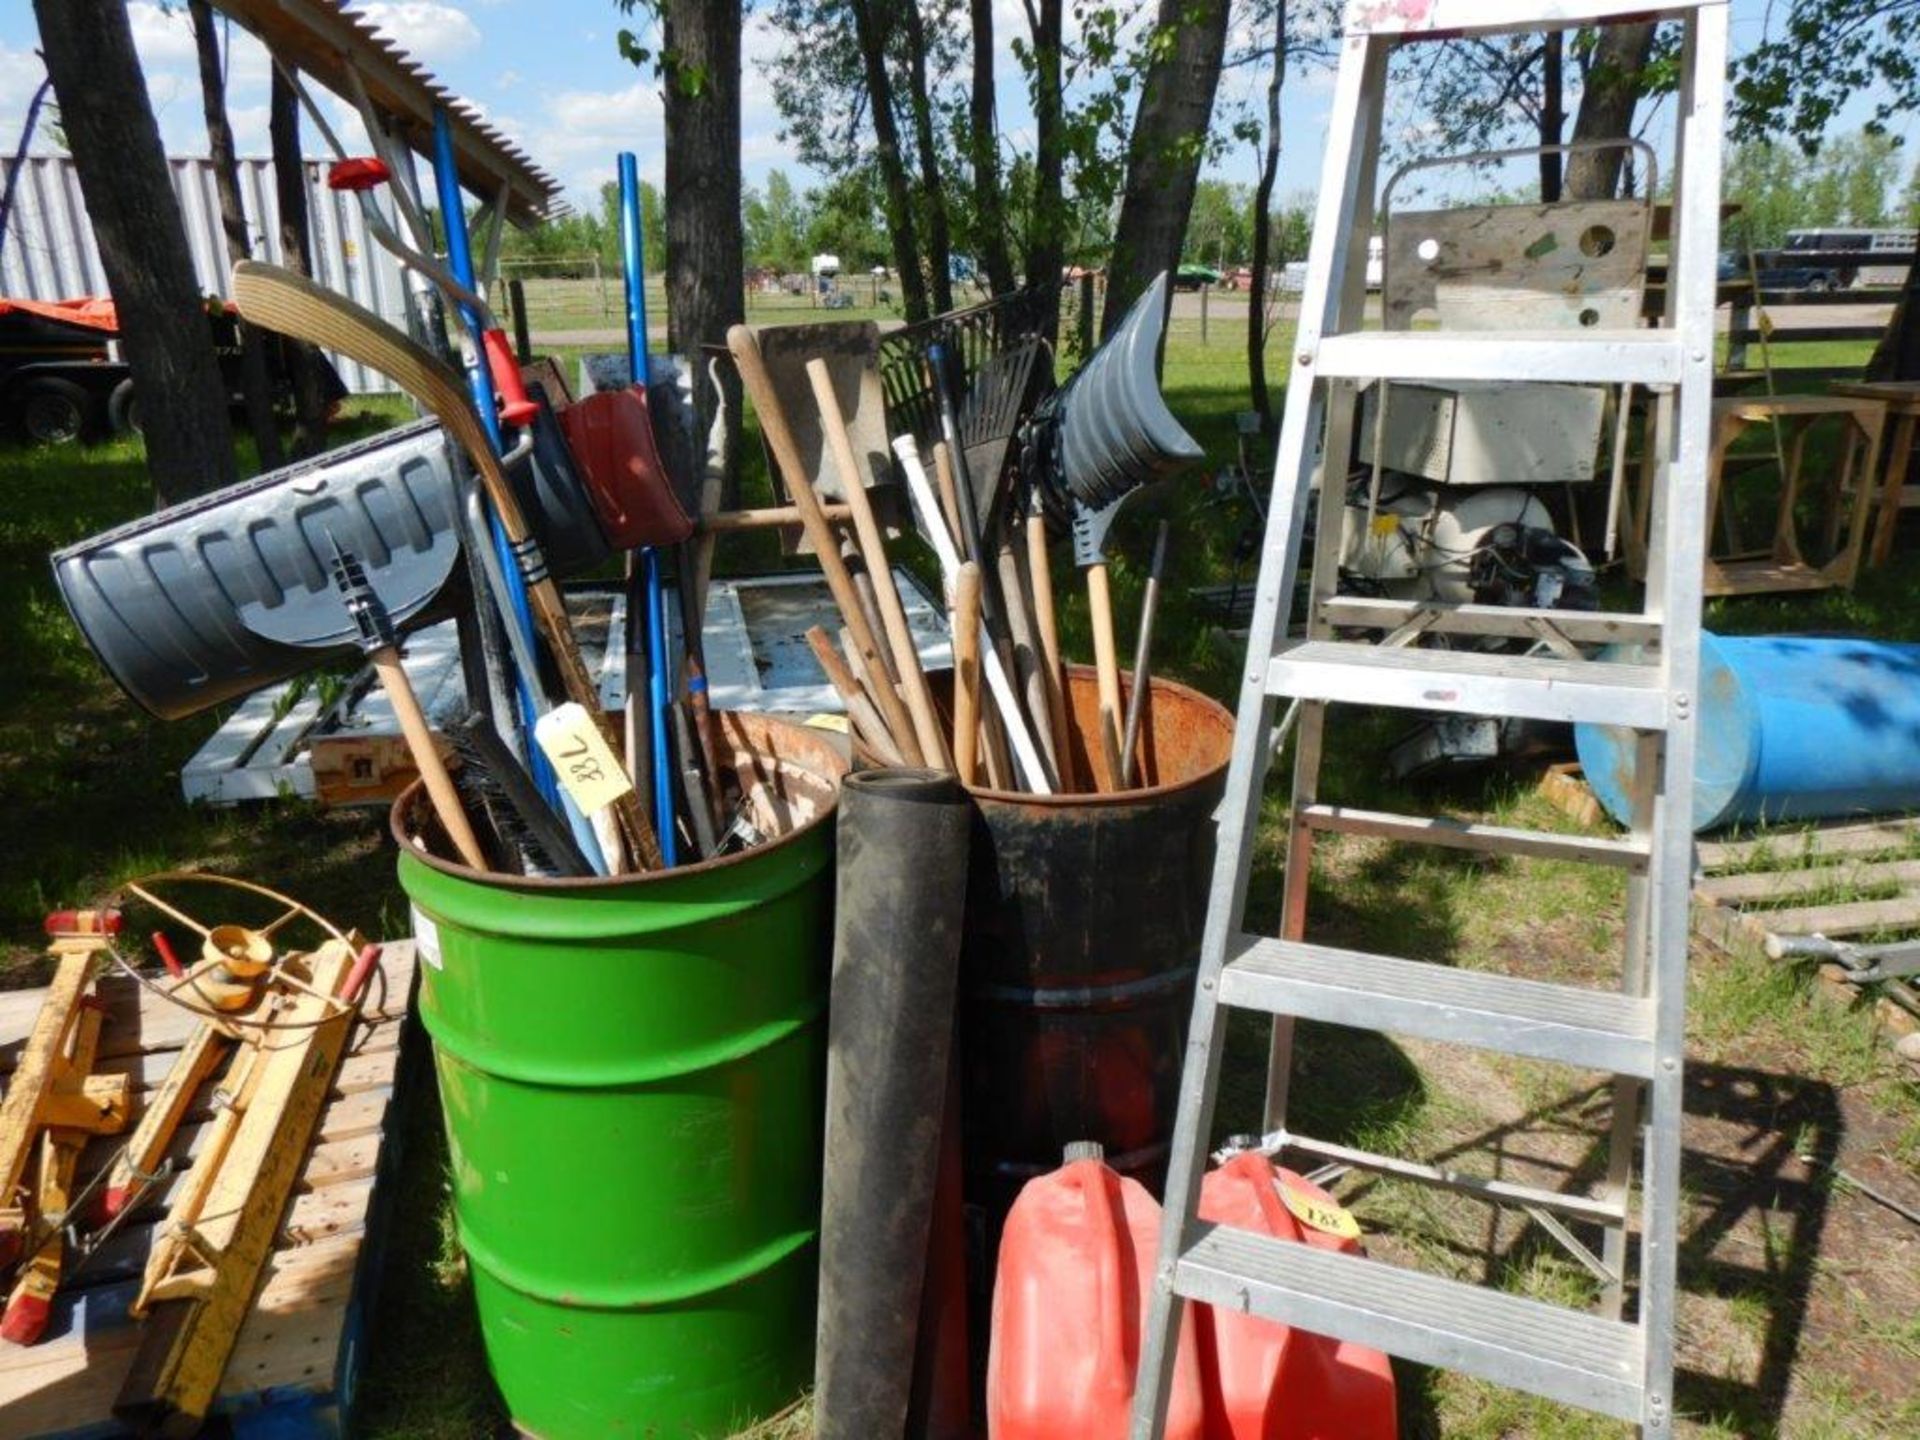 L/O ASSORTED SHOVELS, RAKES, 6FT STEP LADDER, JERRY CANS